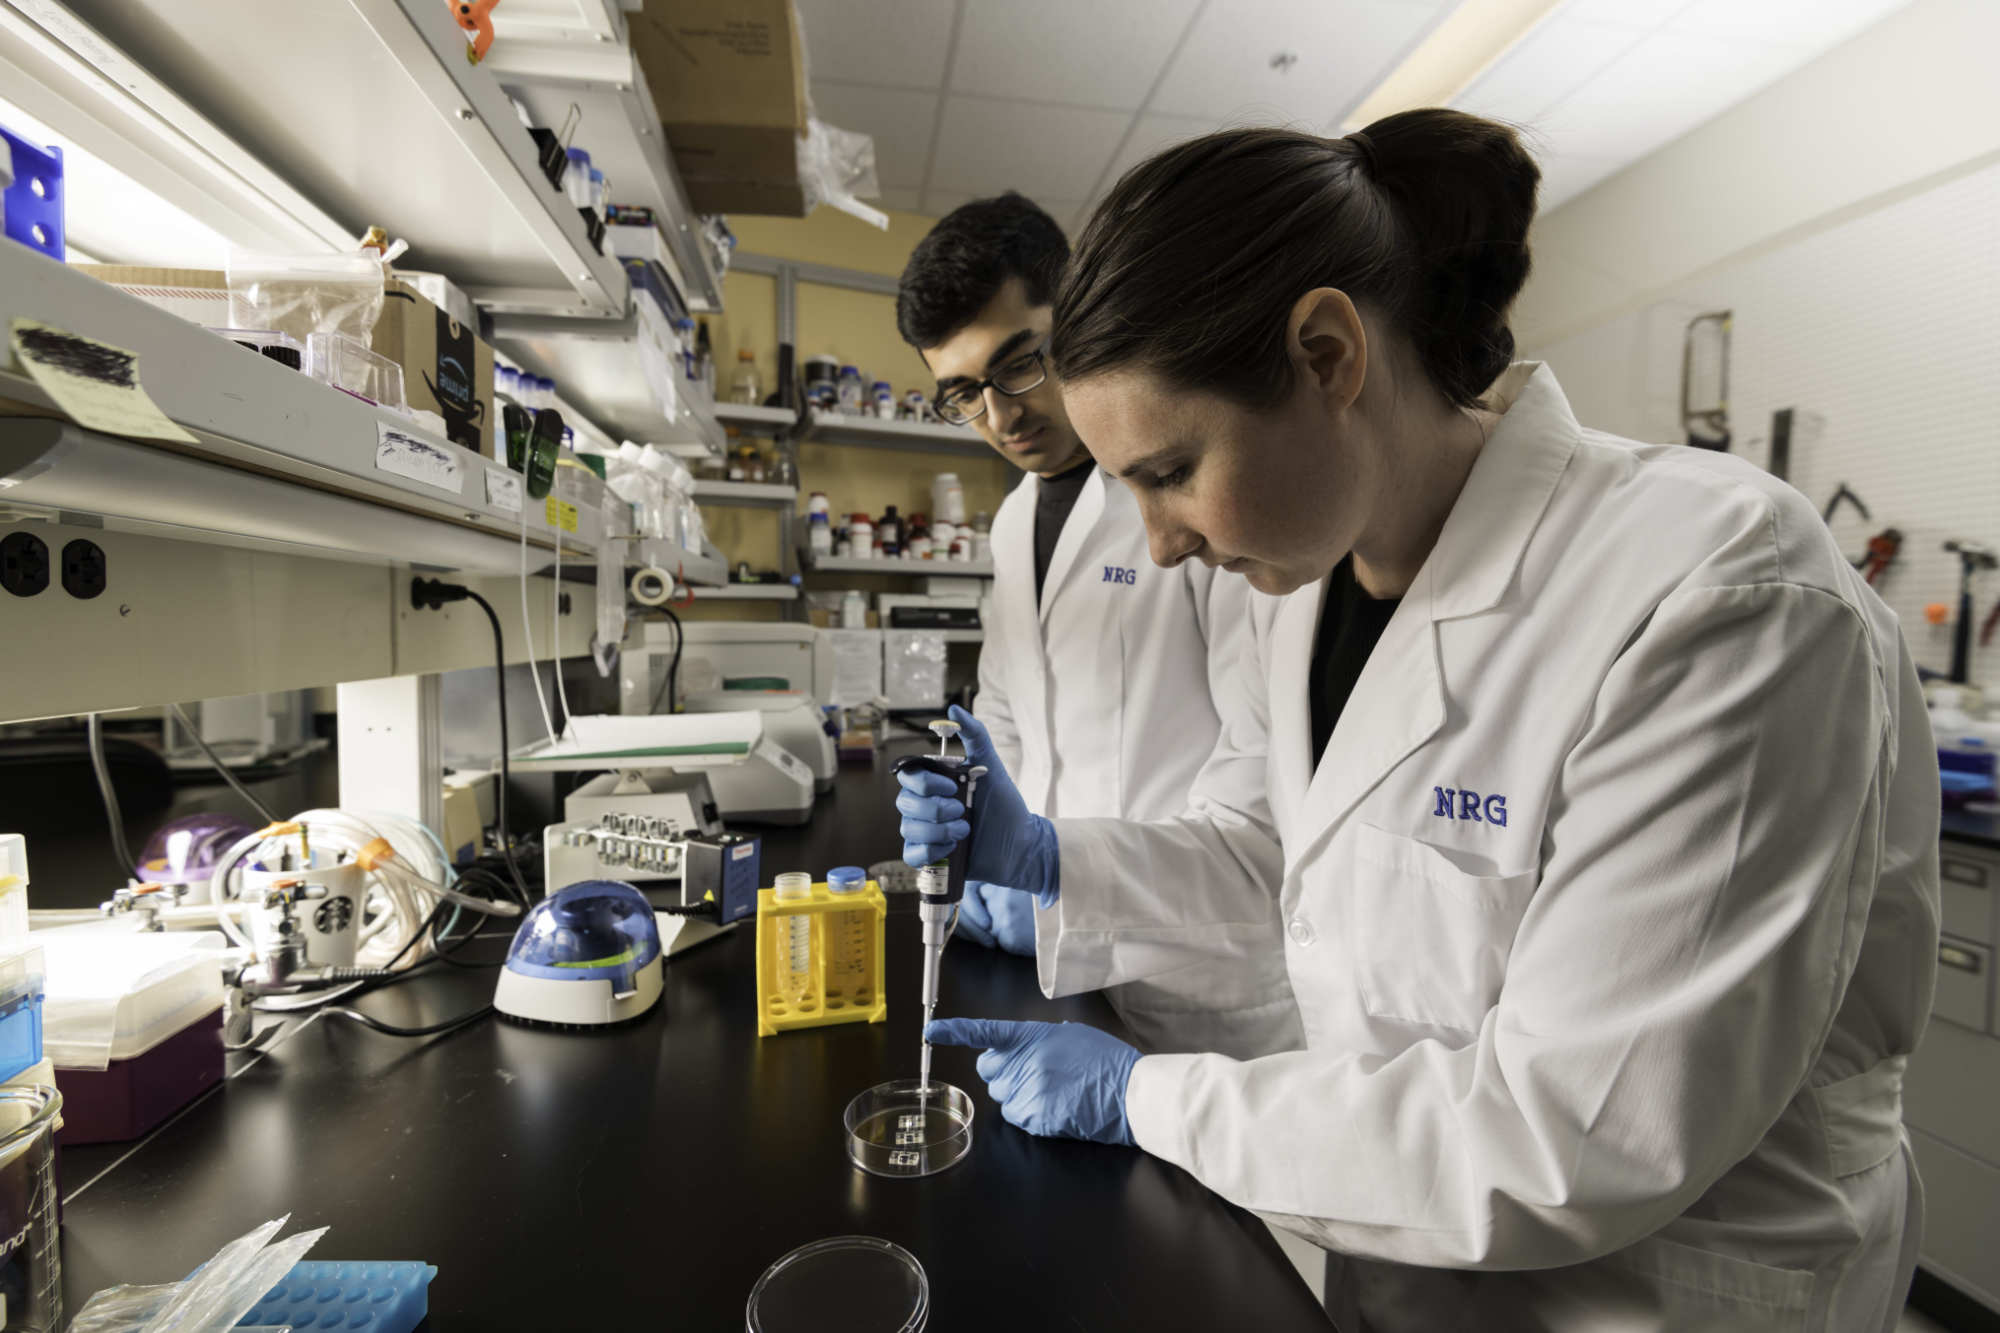 Two graduate students in lab coats work at a bench assembling components for the kind of tissue-on-chip technology being developed by TraCe-bMPS scientists.